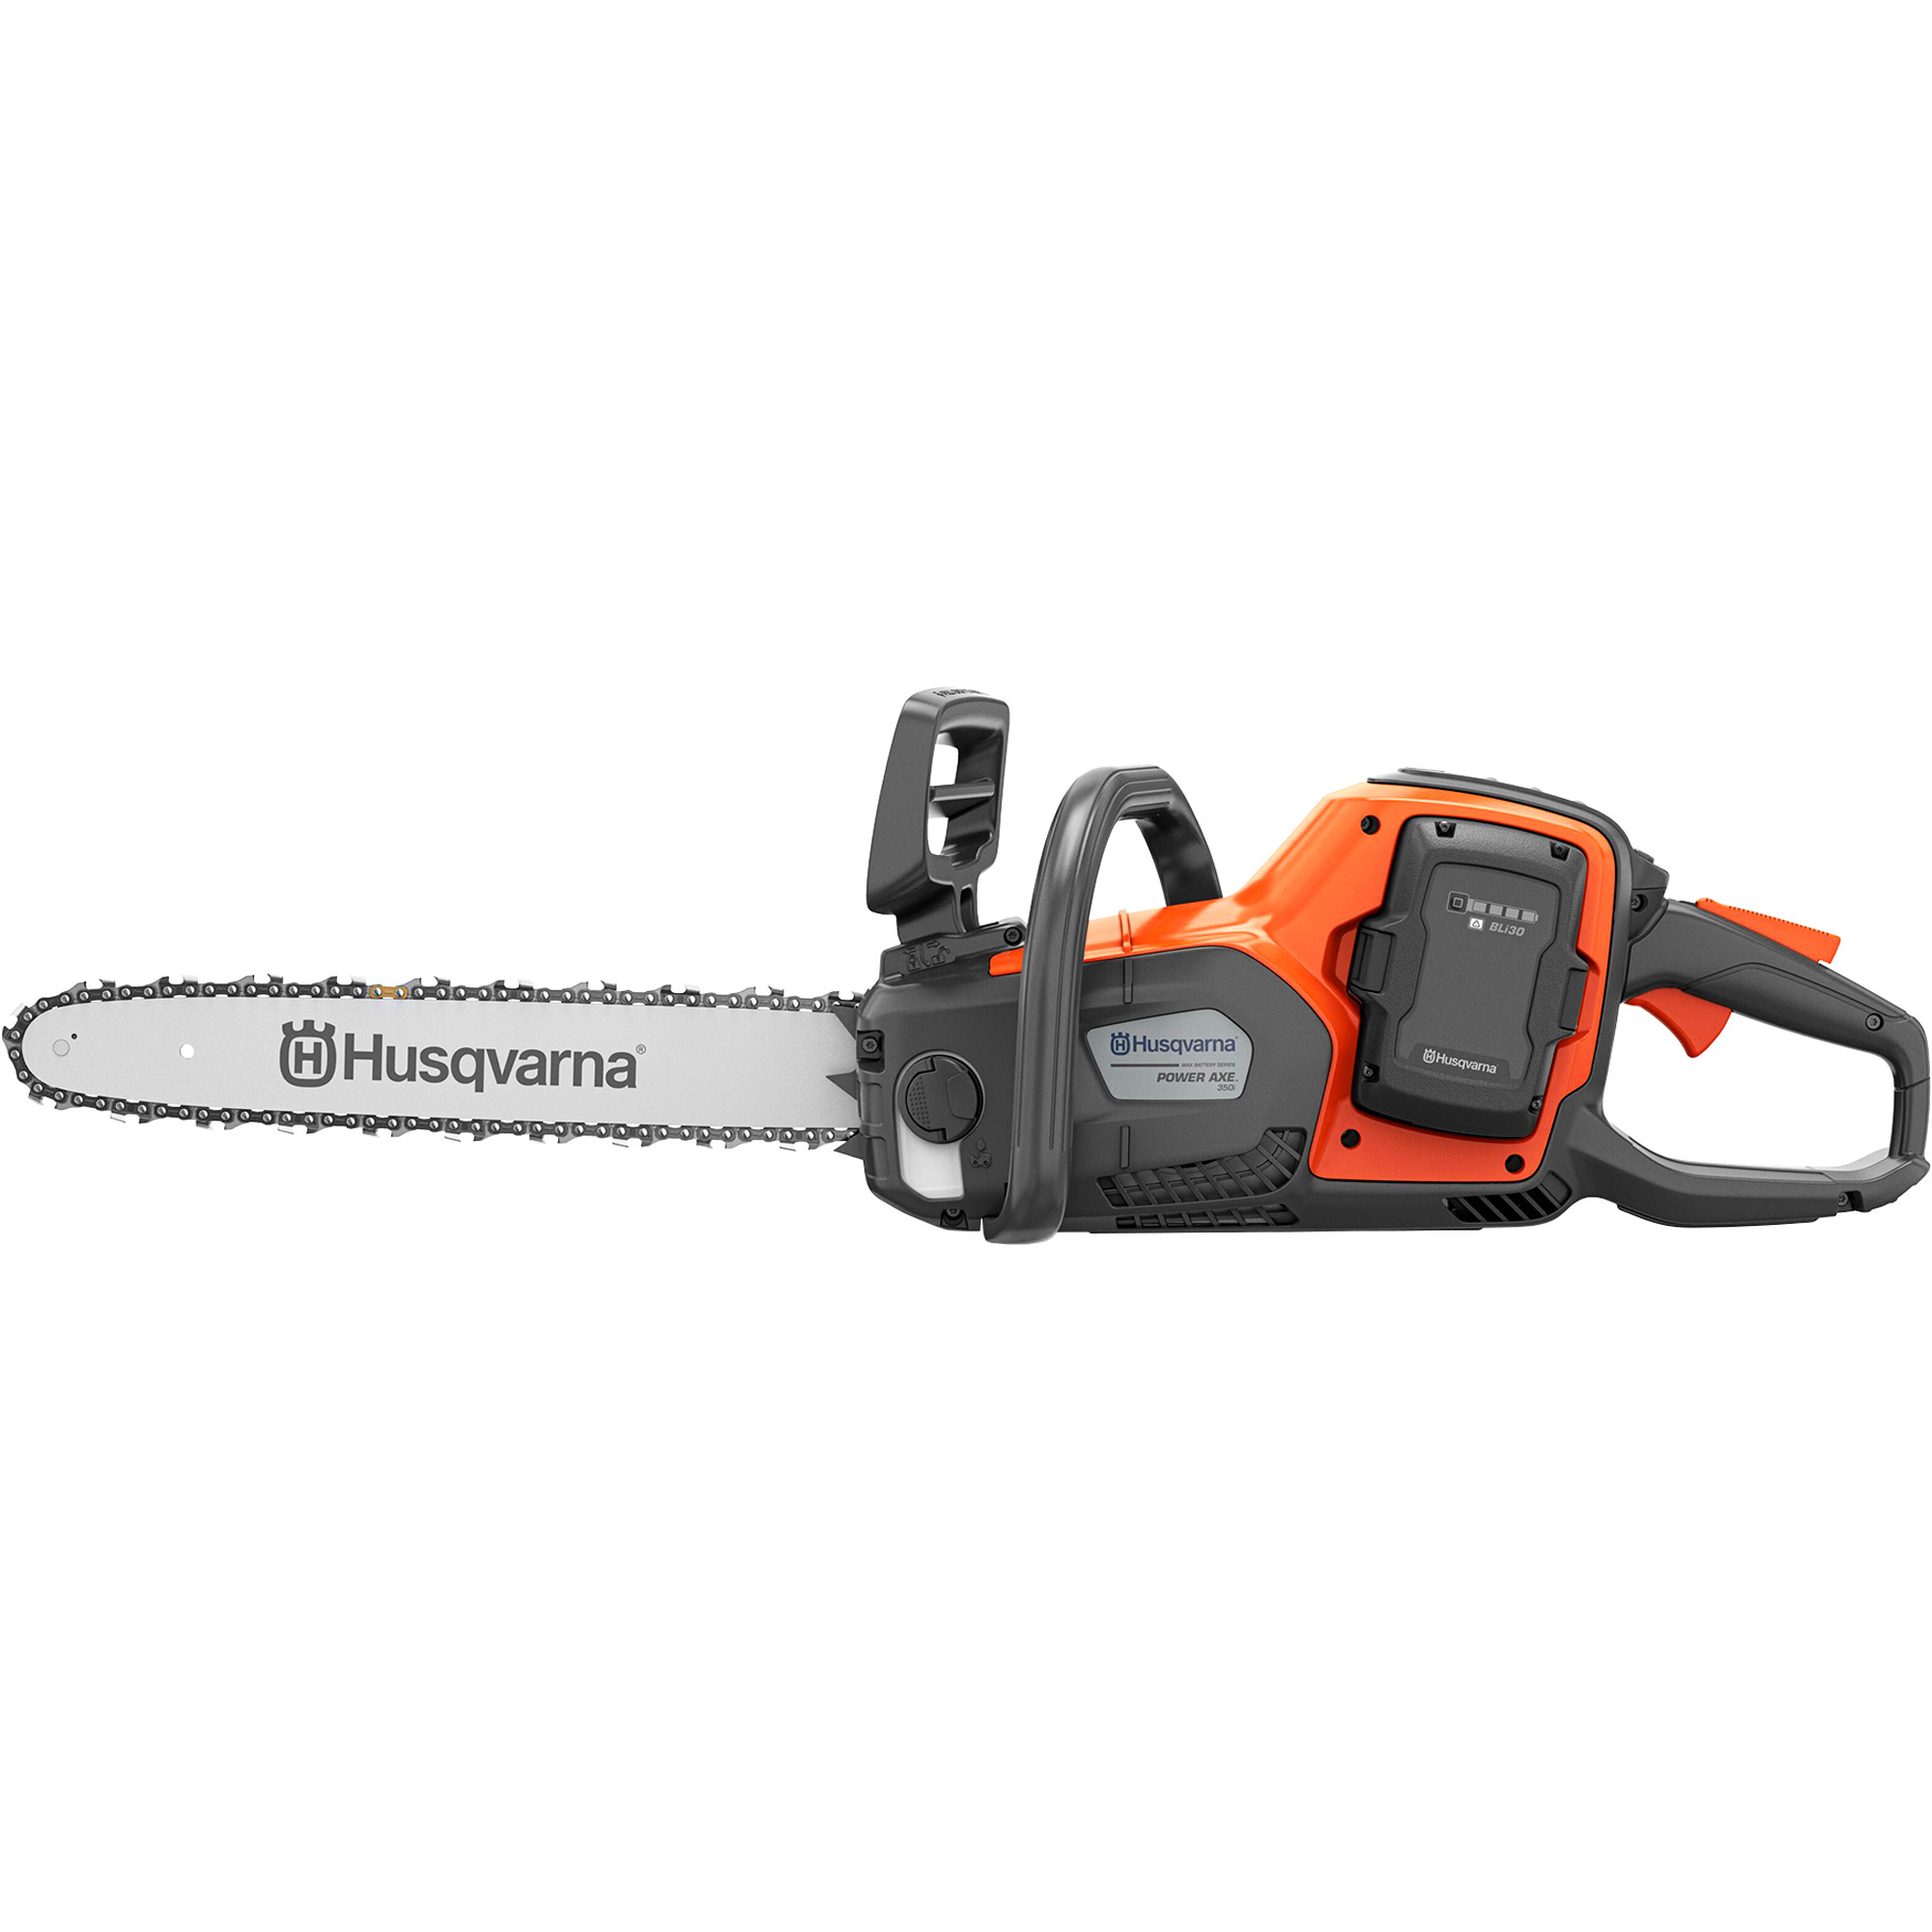 Husqvarna 350i Power Axe Cordless Chainsaw, 18Inch Bar, 40V, 7.5 Ah Lithium-Ion Battery and Charger, Model 350i